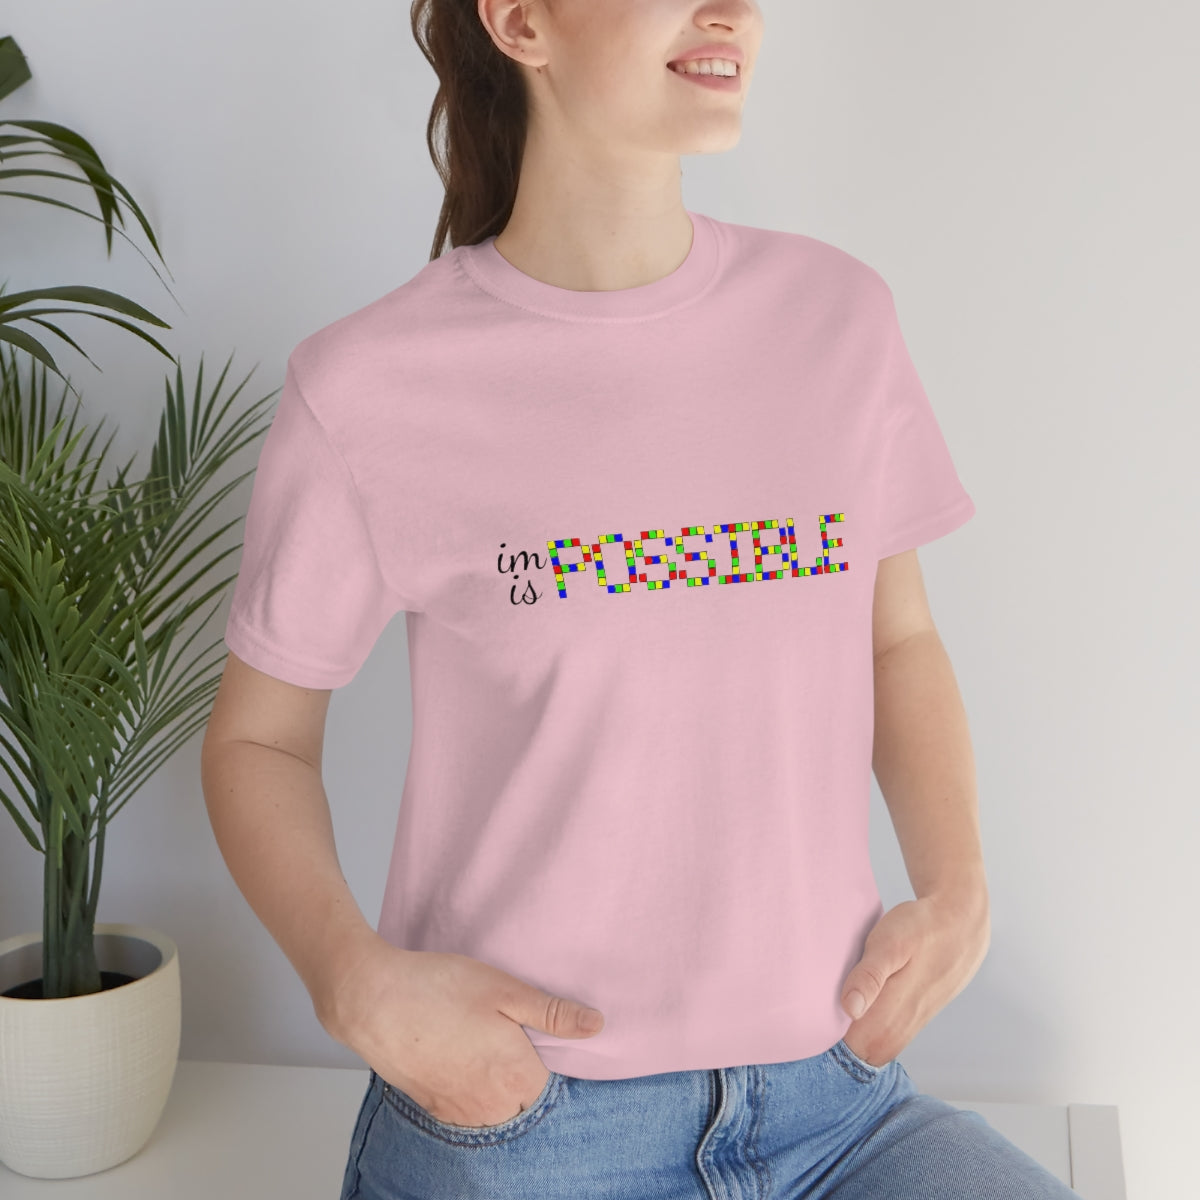 Unisex Jersey Short Sleeve Tee "Impossible is possible"